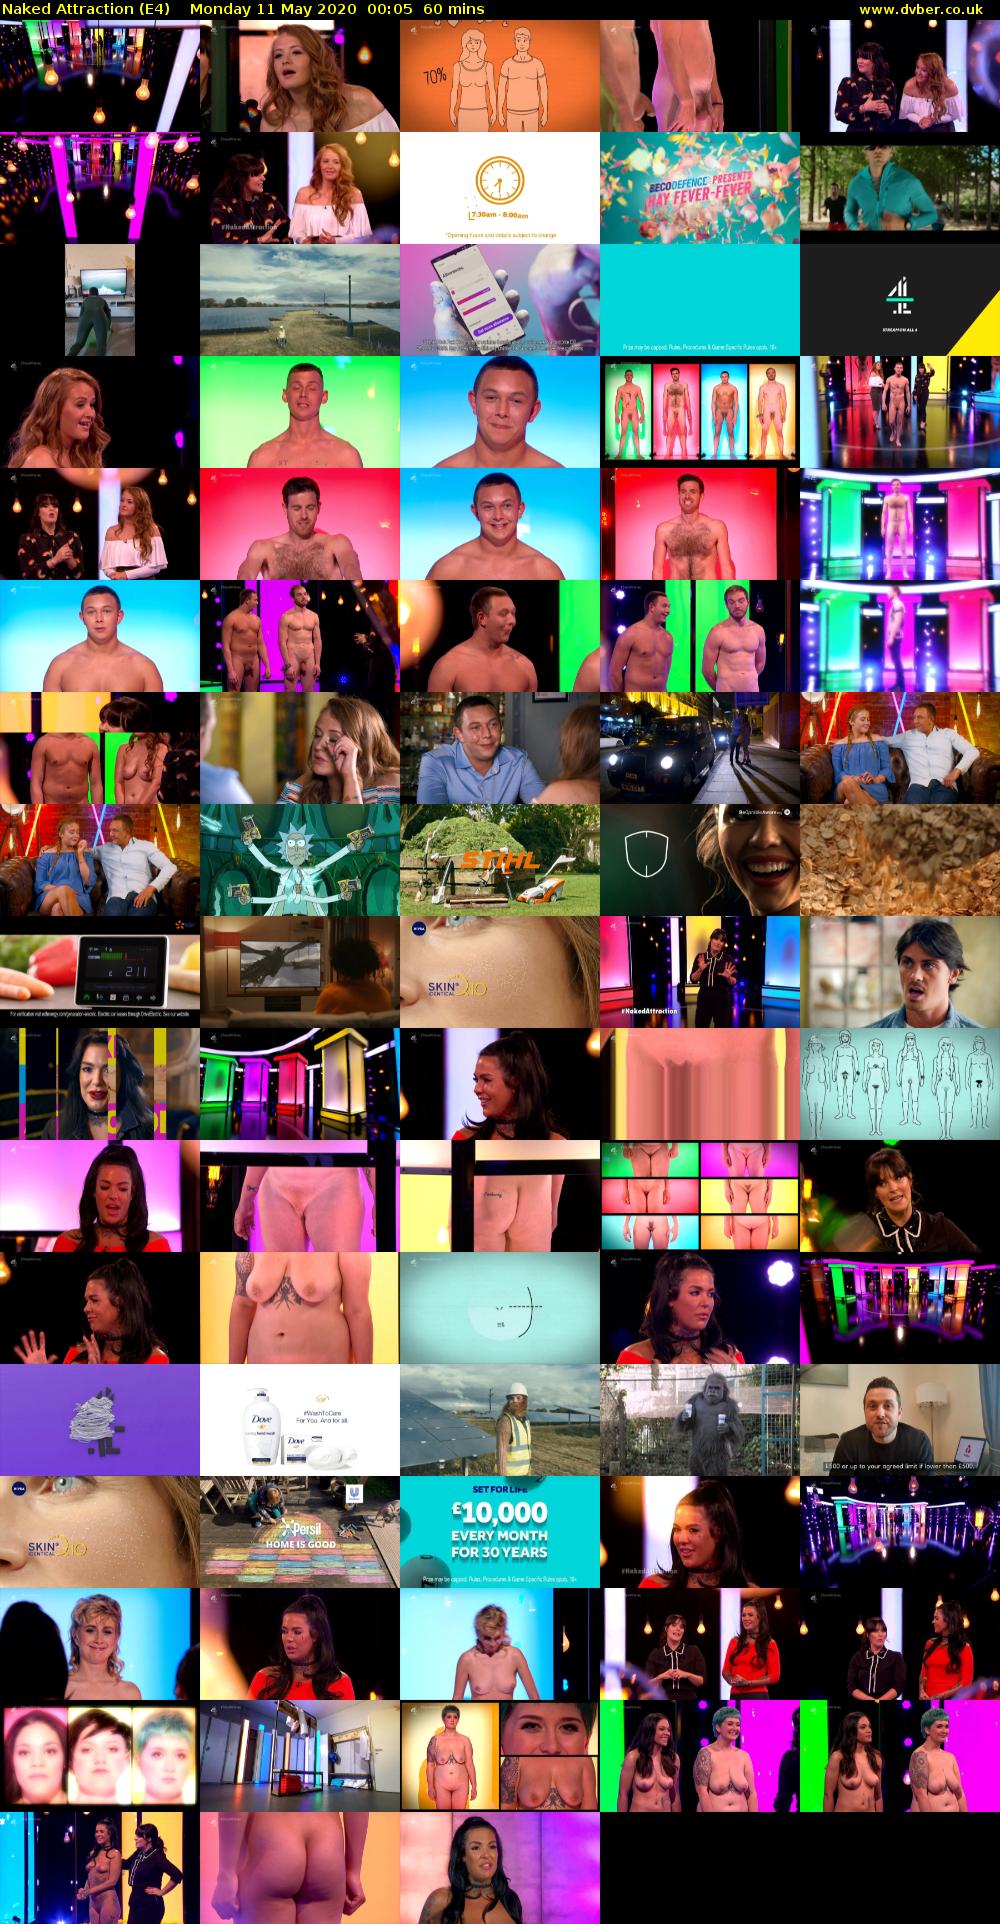 Naked Attraction (E4) Monday 11 May 2020 00:05 - 01:05